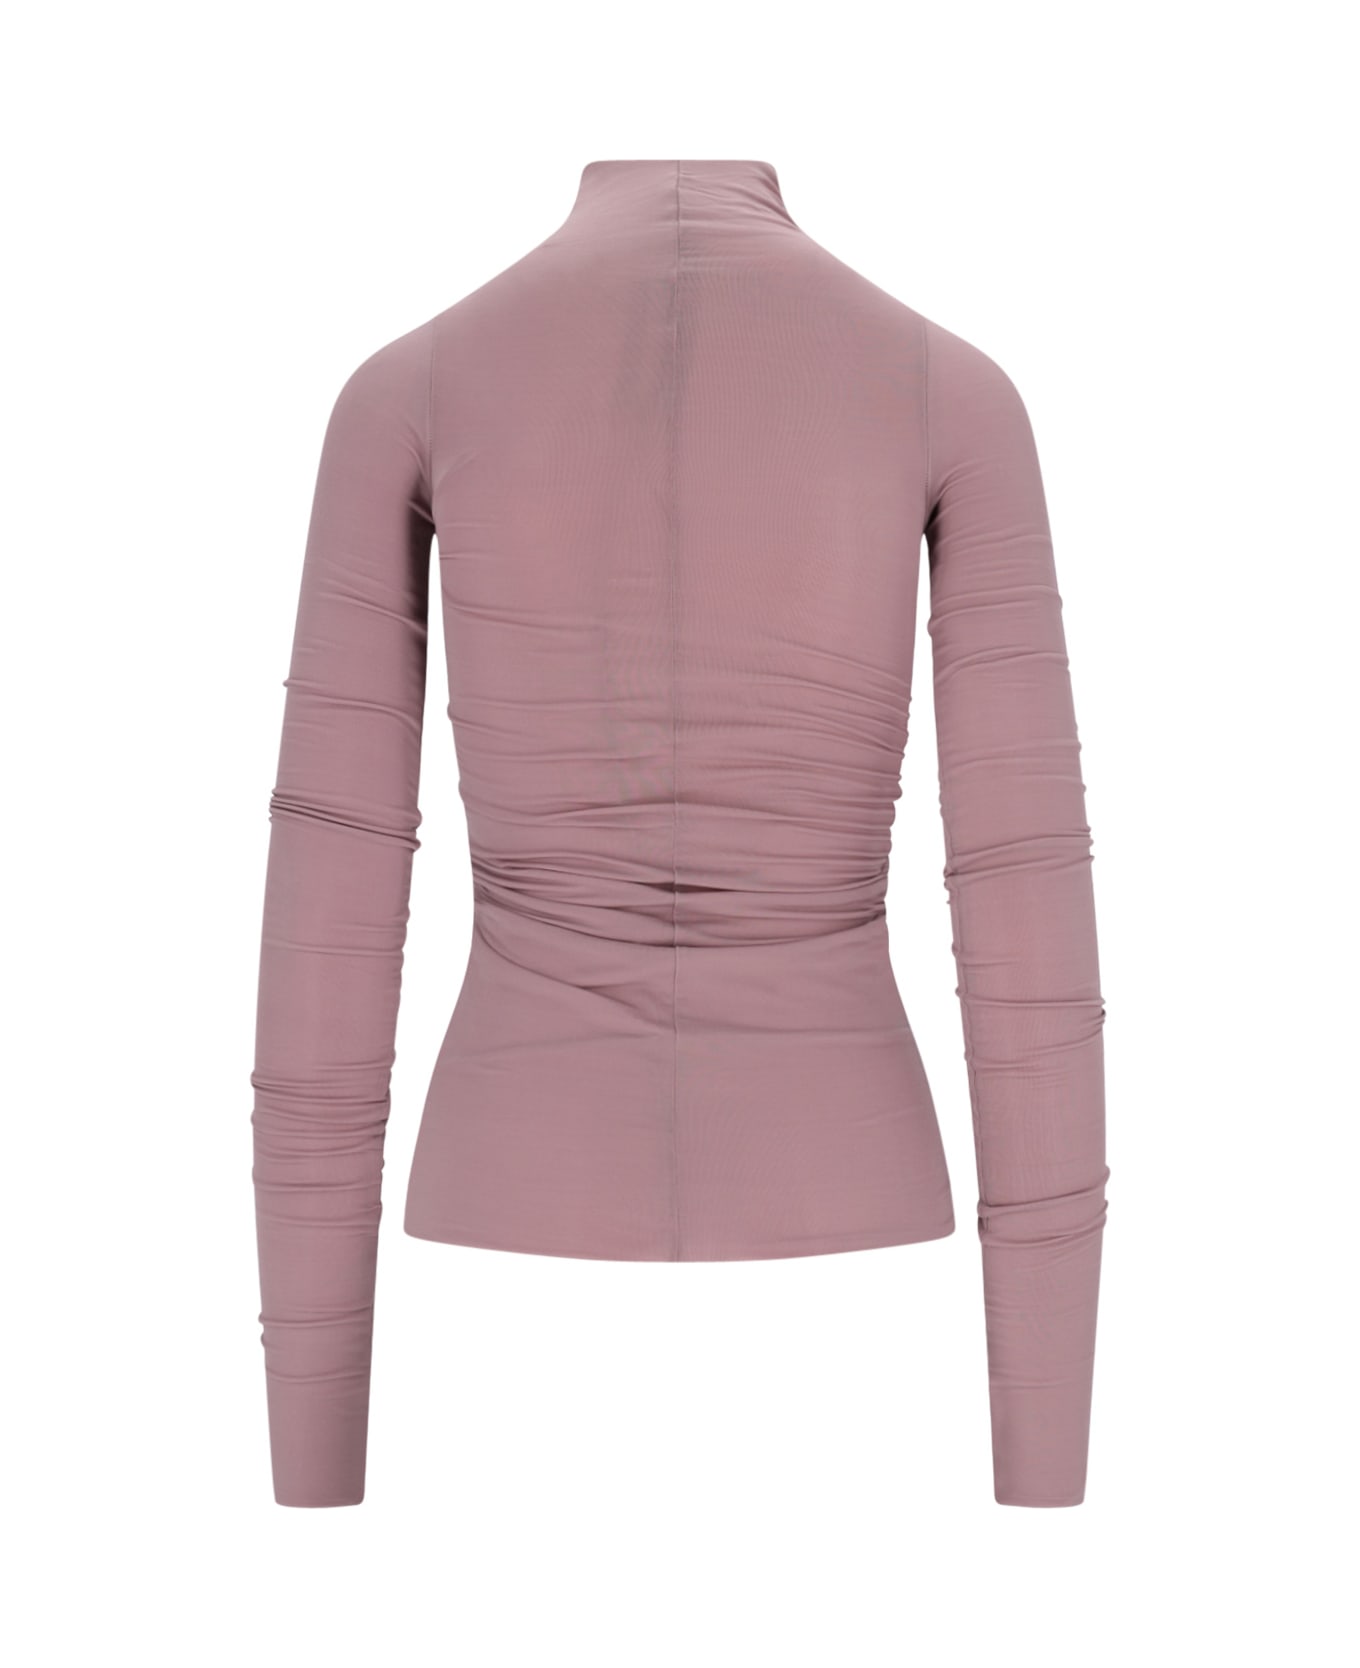 Rick Owens Cut Out Detail Top - Pink